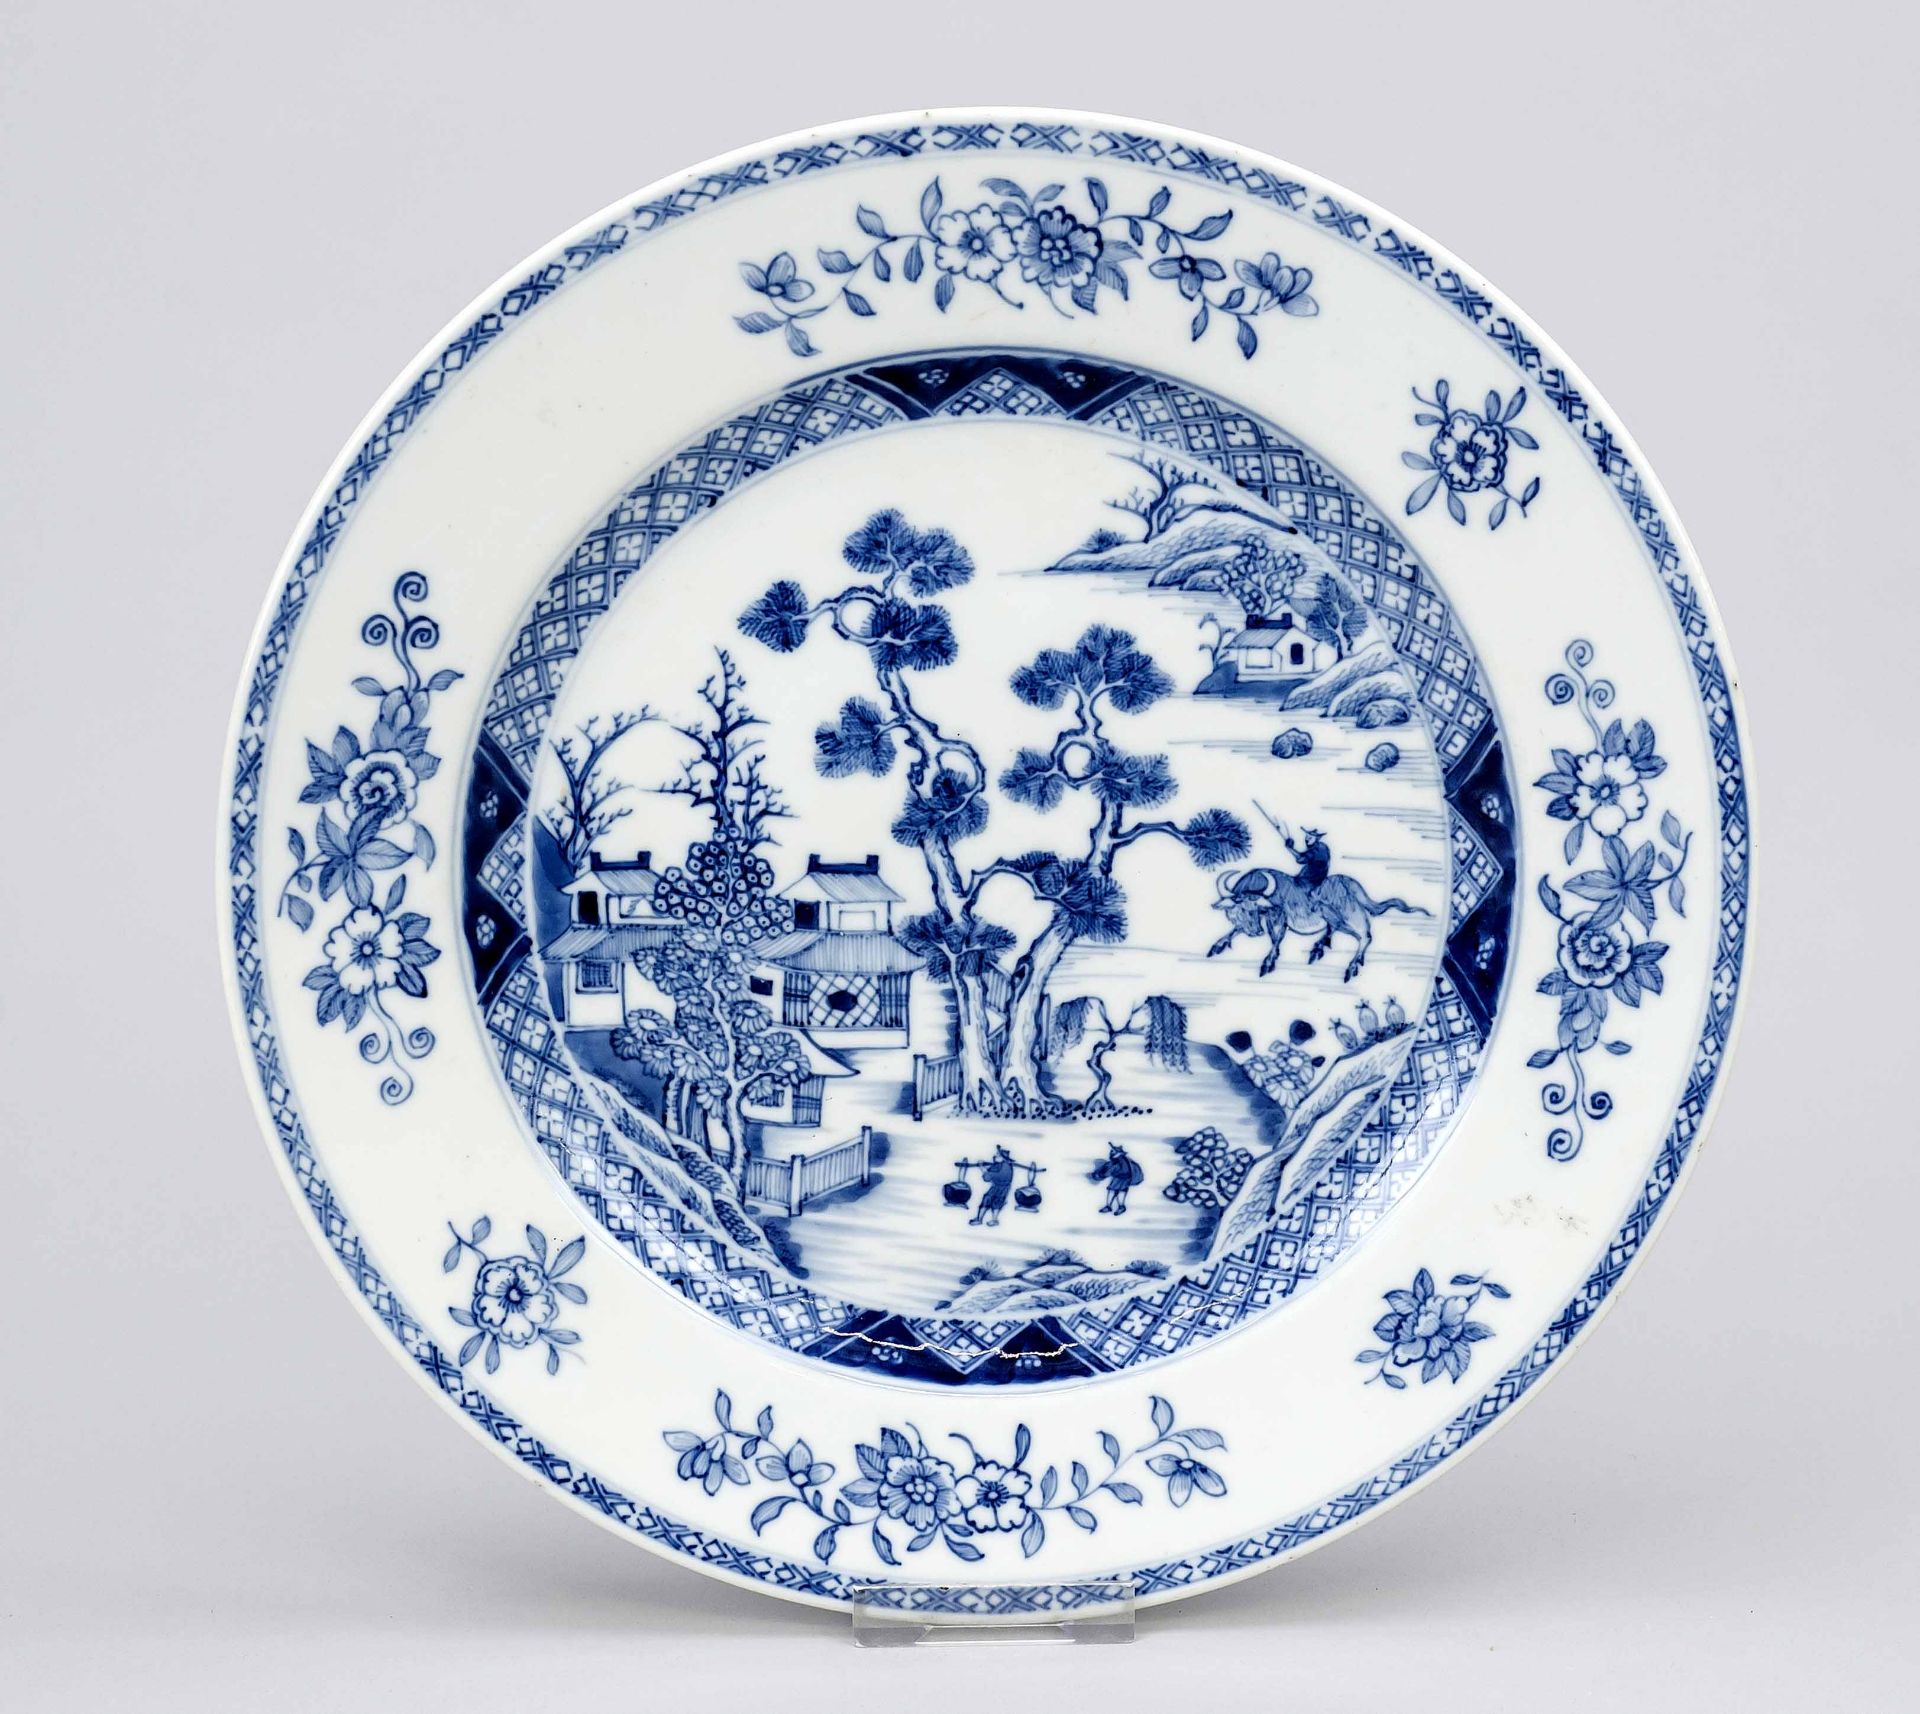 Plate with landscape decoration, China 17th/18th century (Qing/Kangxi). Cobalt blue decoration in